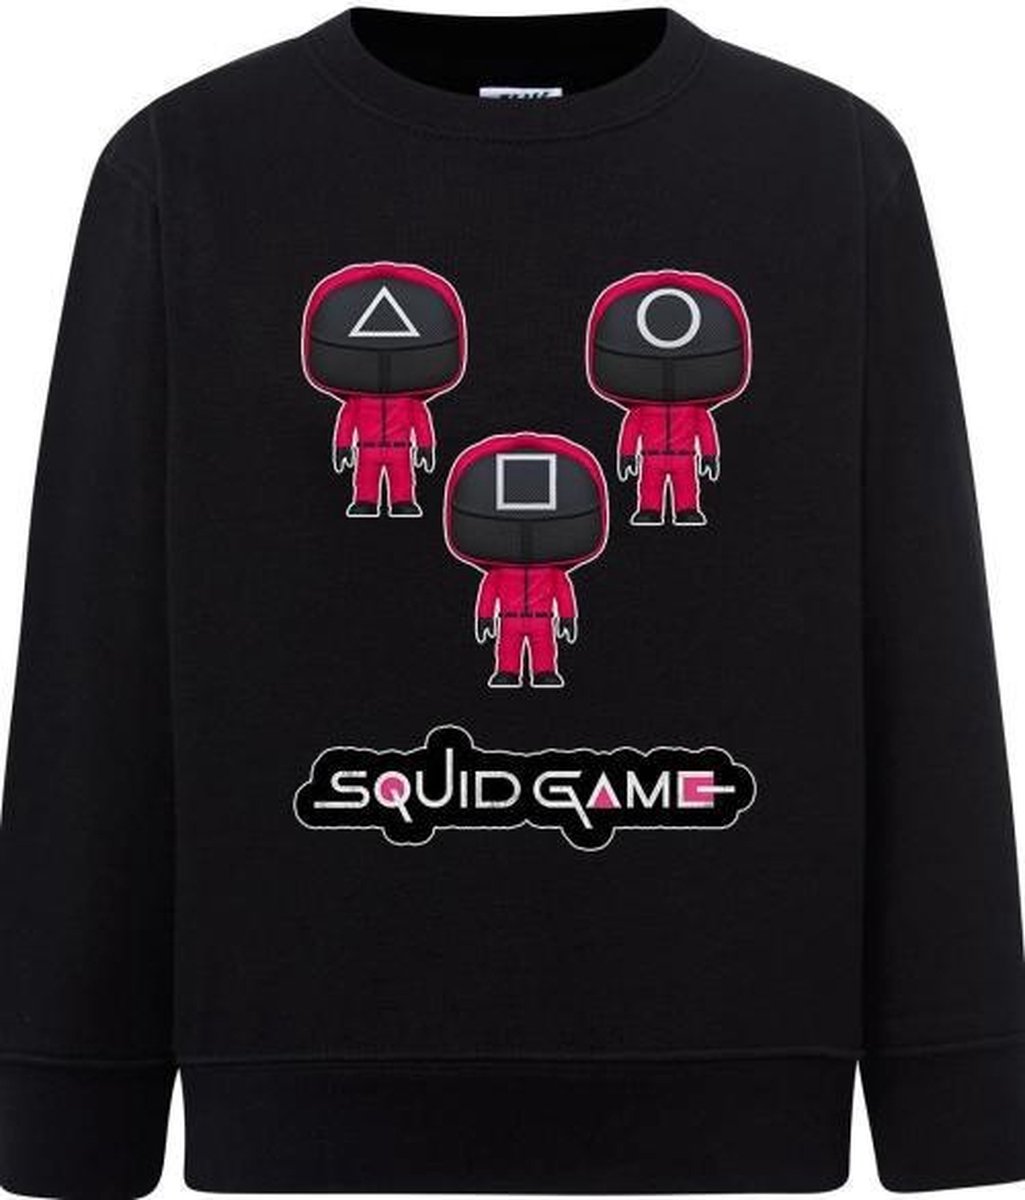 Sweater Squid game 6003 Black Size : S